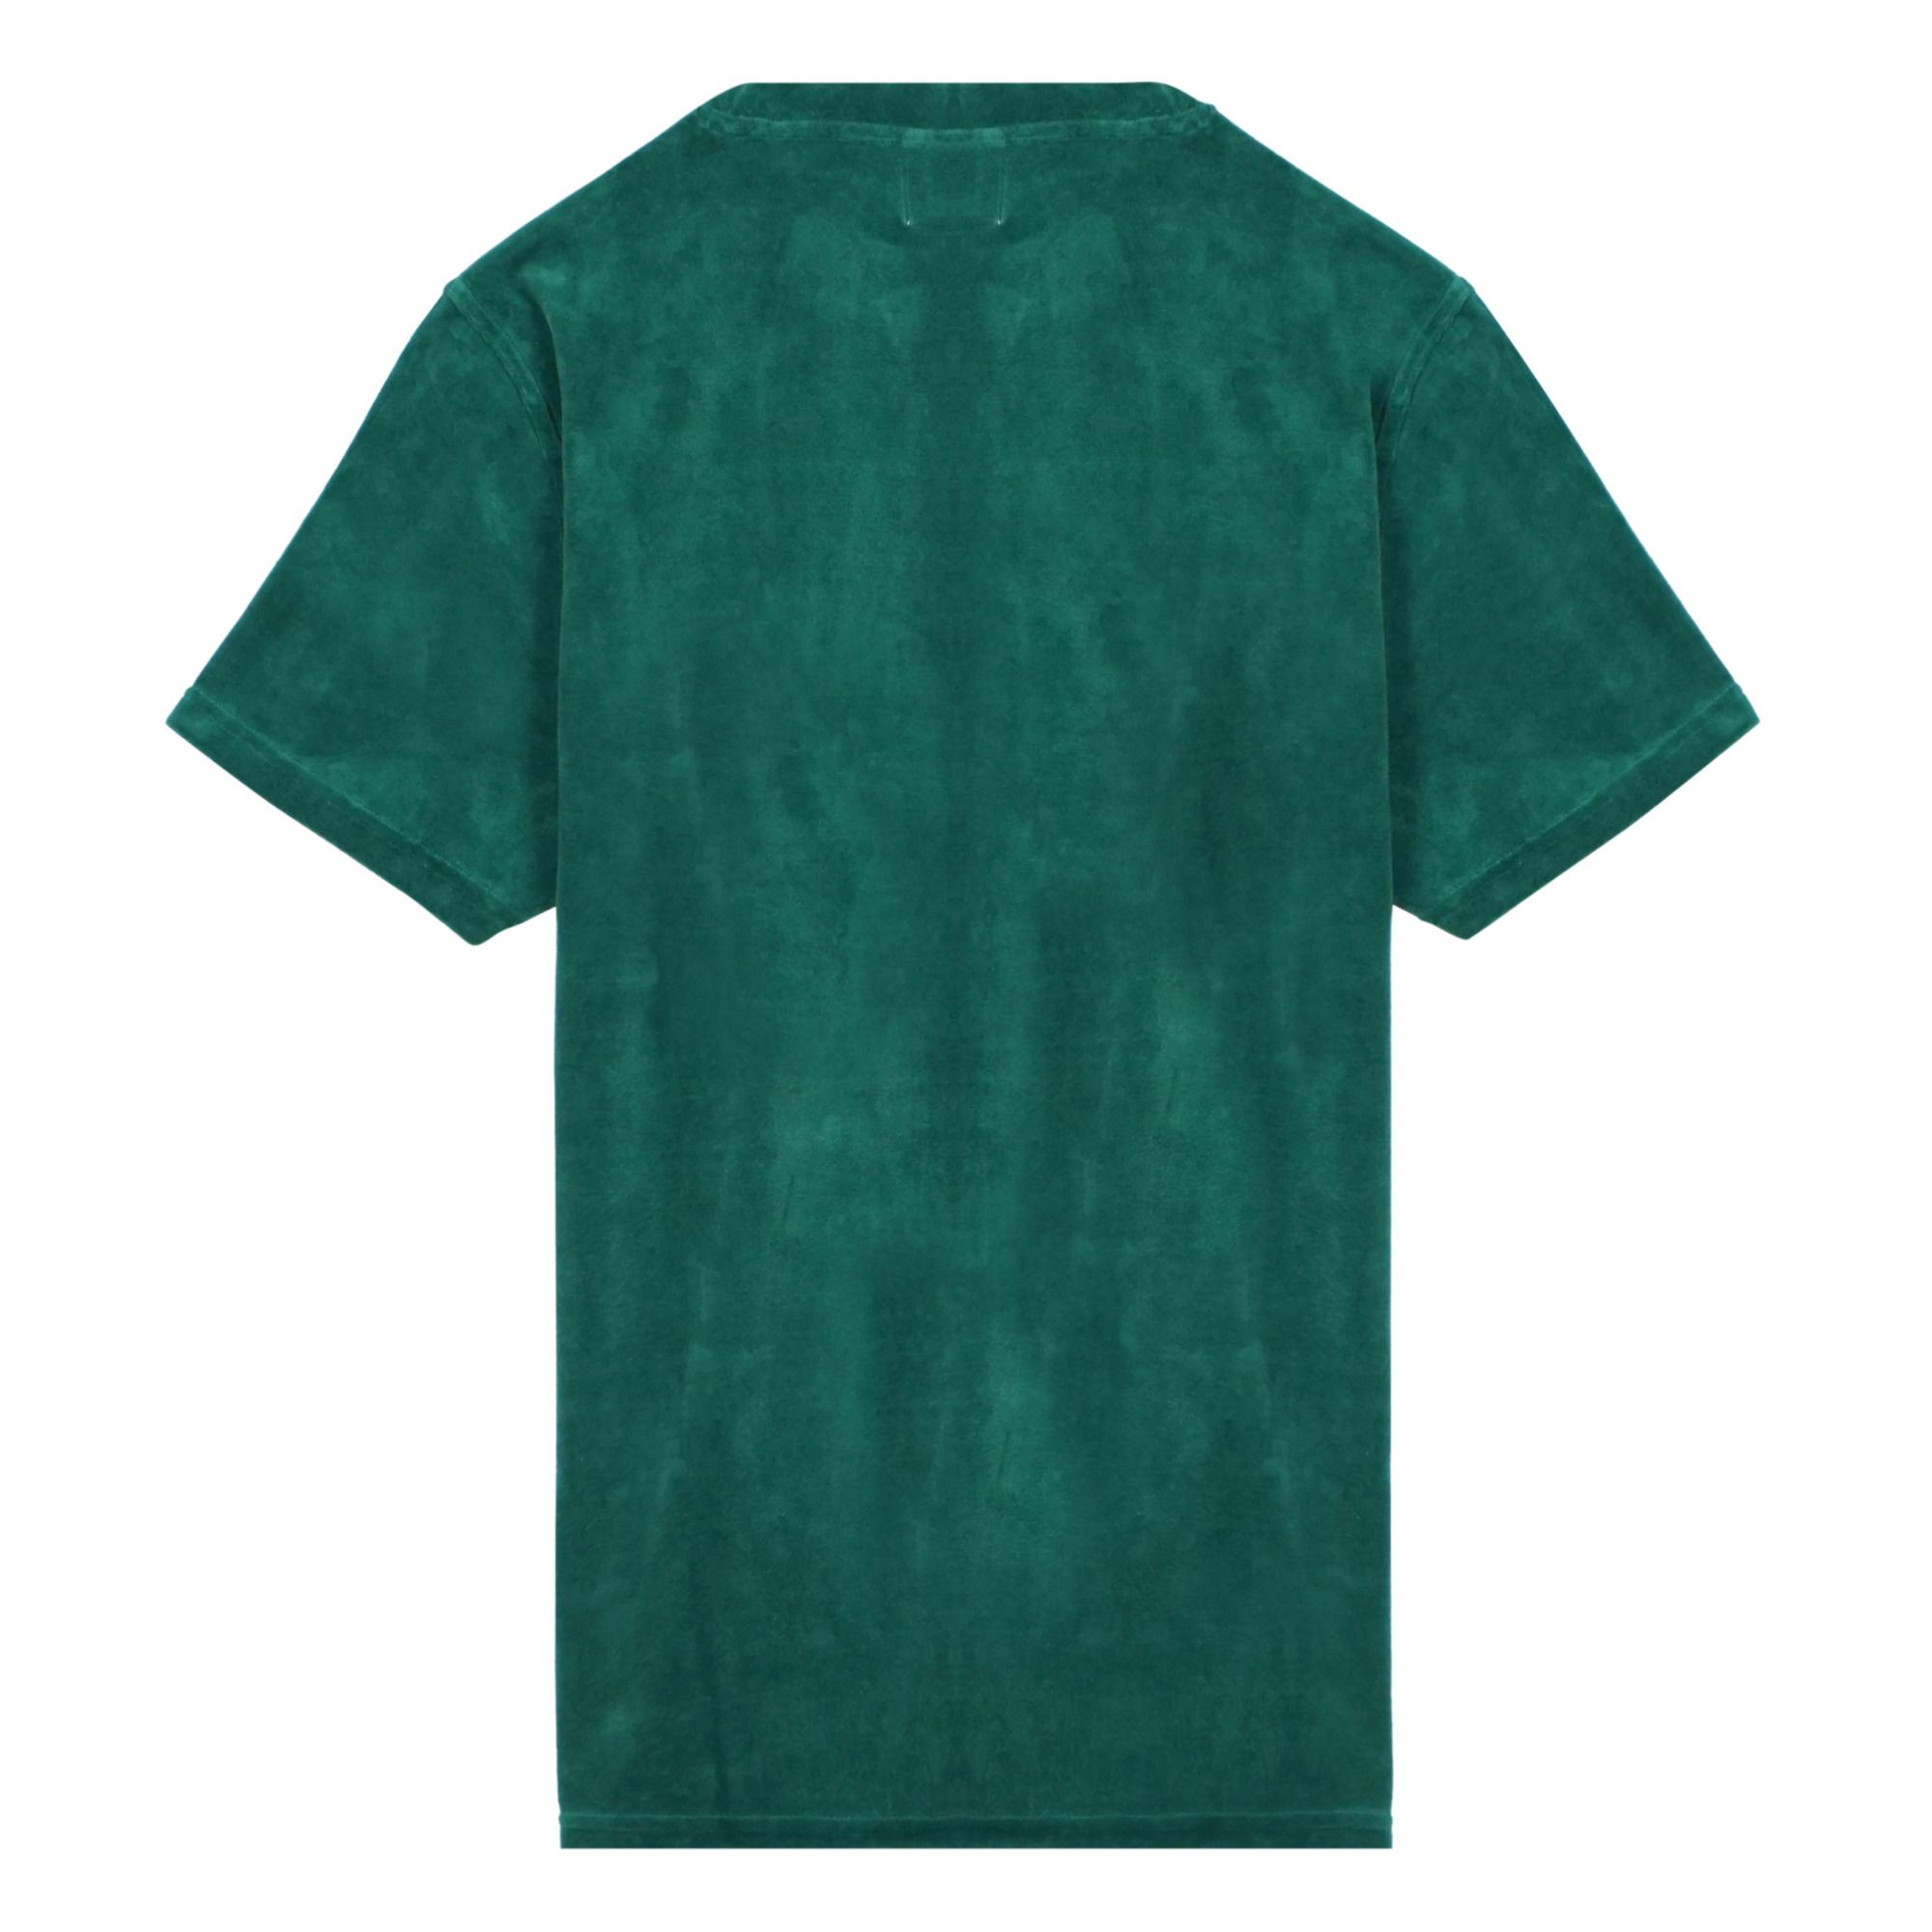 Terry Cloth T-shirt Verde Oscuro- Imagen del producto n°3